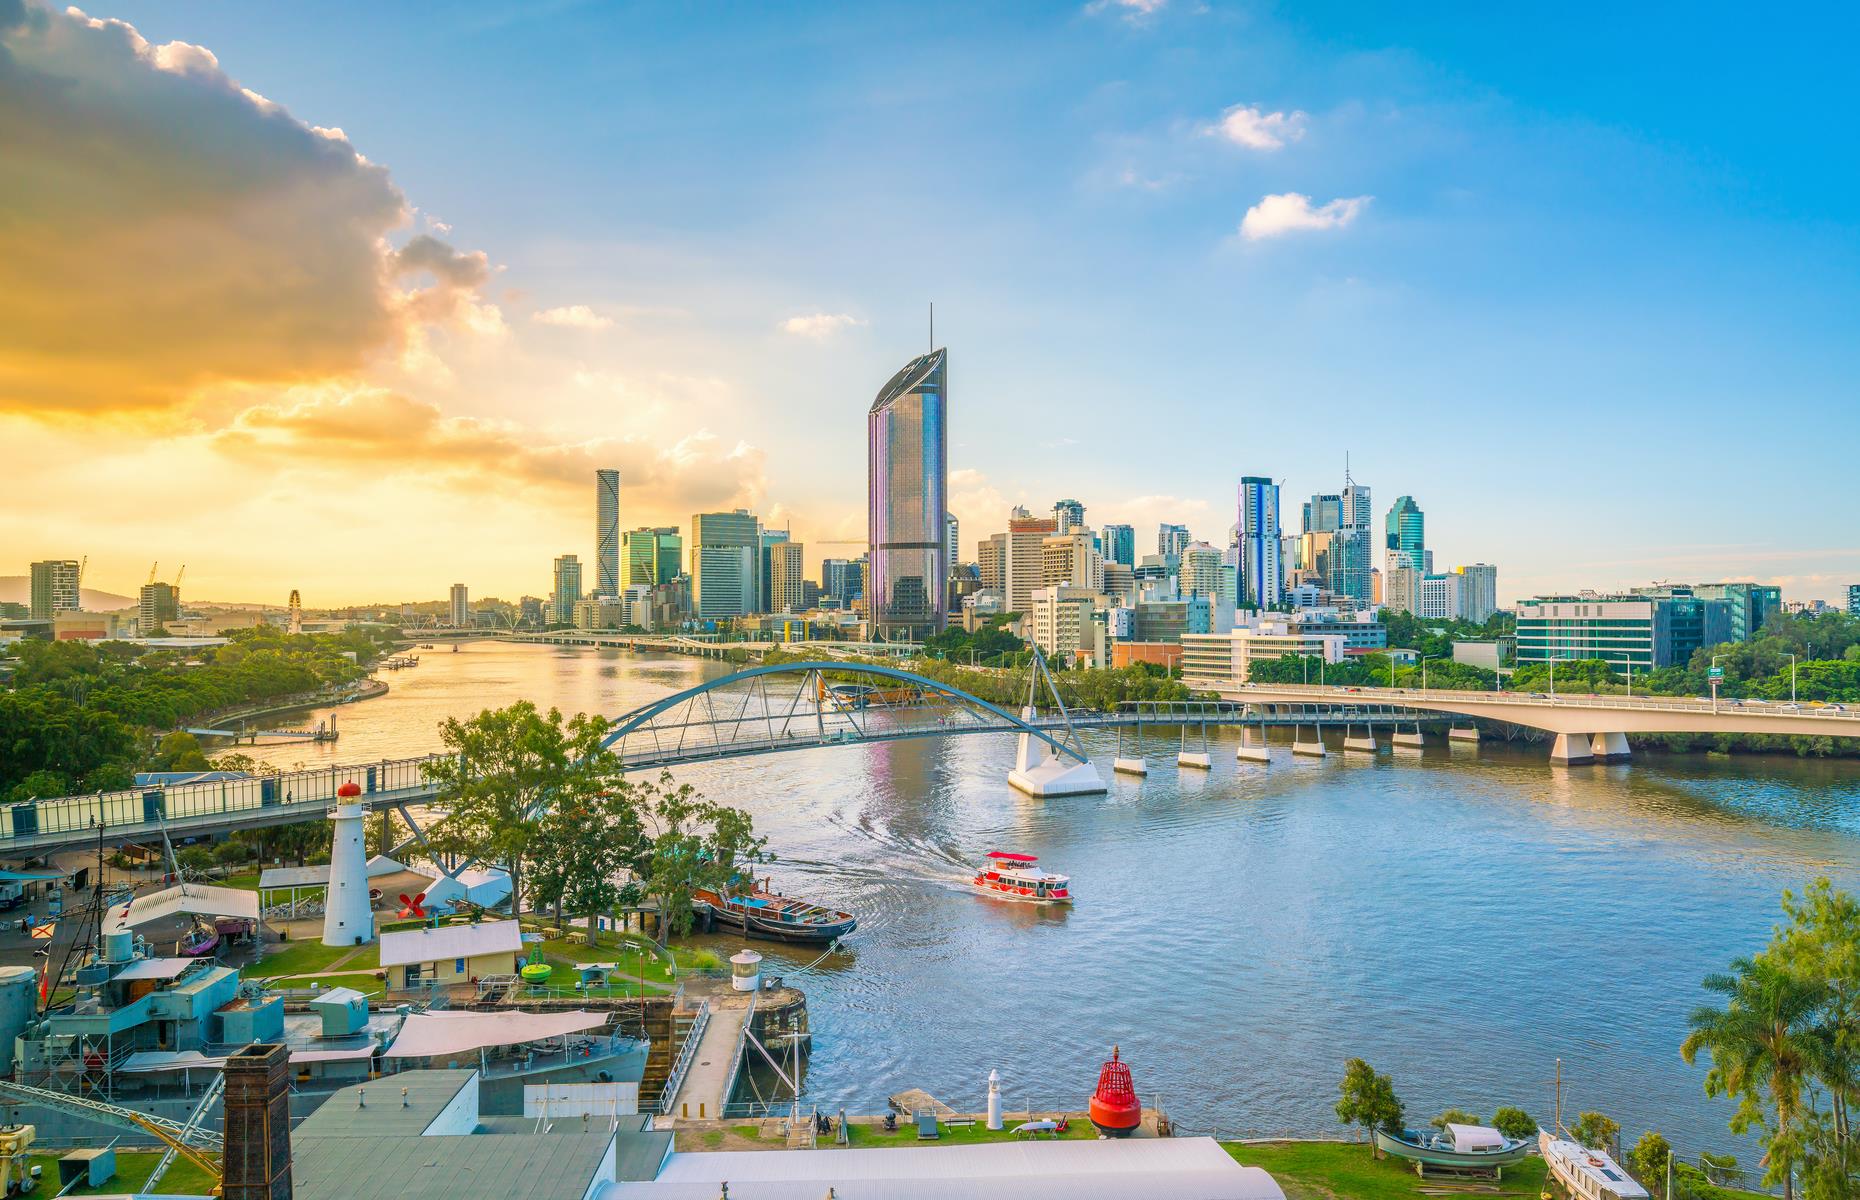 <p>The best way to get a feel for Queensland’s capital is on the Brisbane River, and you can float along some of it for free. Hop on board the <a href="https://jp.translink.com.au/plan-your-journey/timetables/Ferry/T/cityhopper">CityHopper</a> – a free inner-city ferry service that will take you from North Quay to Sydney St, New Farm. You can get on and off as much as you like at any of the eight stops. Depart at New Farm and go for a wander around leafy riverside New Farm Park, then follow the Brisbane Riverwalk along the water to dining hub <a href="https://howardsmithwharves.com/">Howard Smith Wharves</a> for a bite to eat.</p>